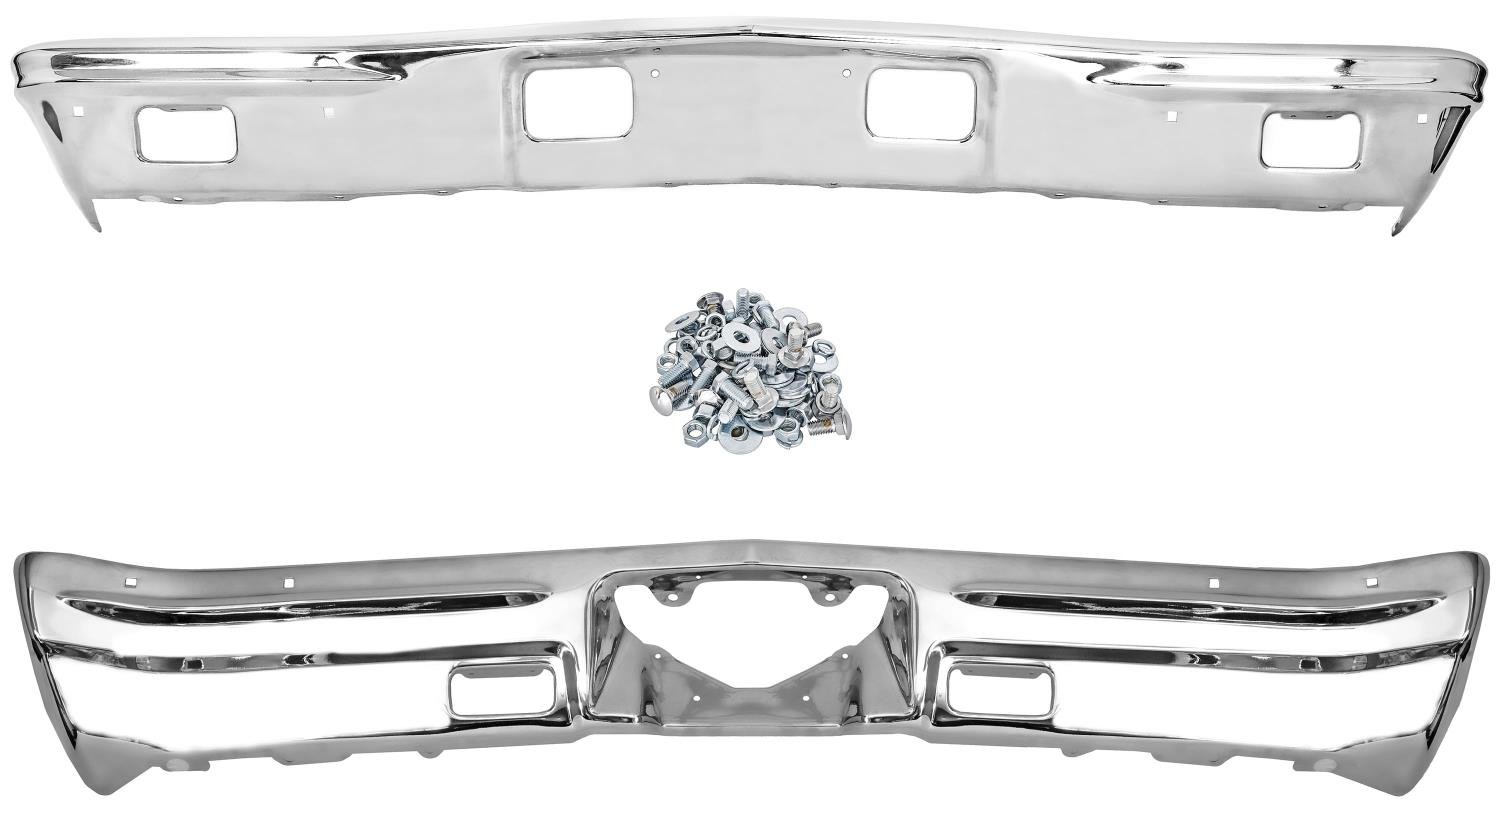 Bumper Kit with Mounting Hardware for 1968 Chevrolet Chevelle [Front & Rear]